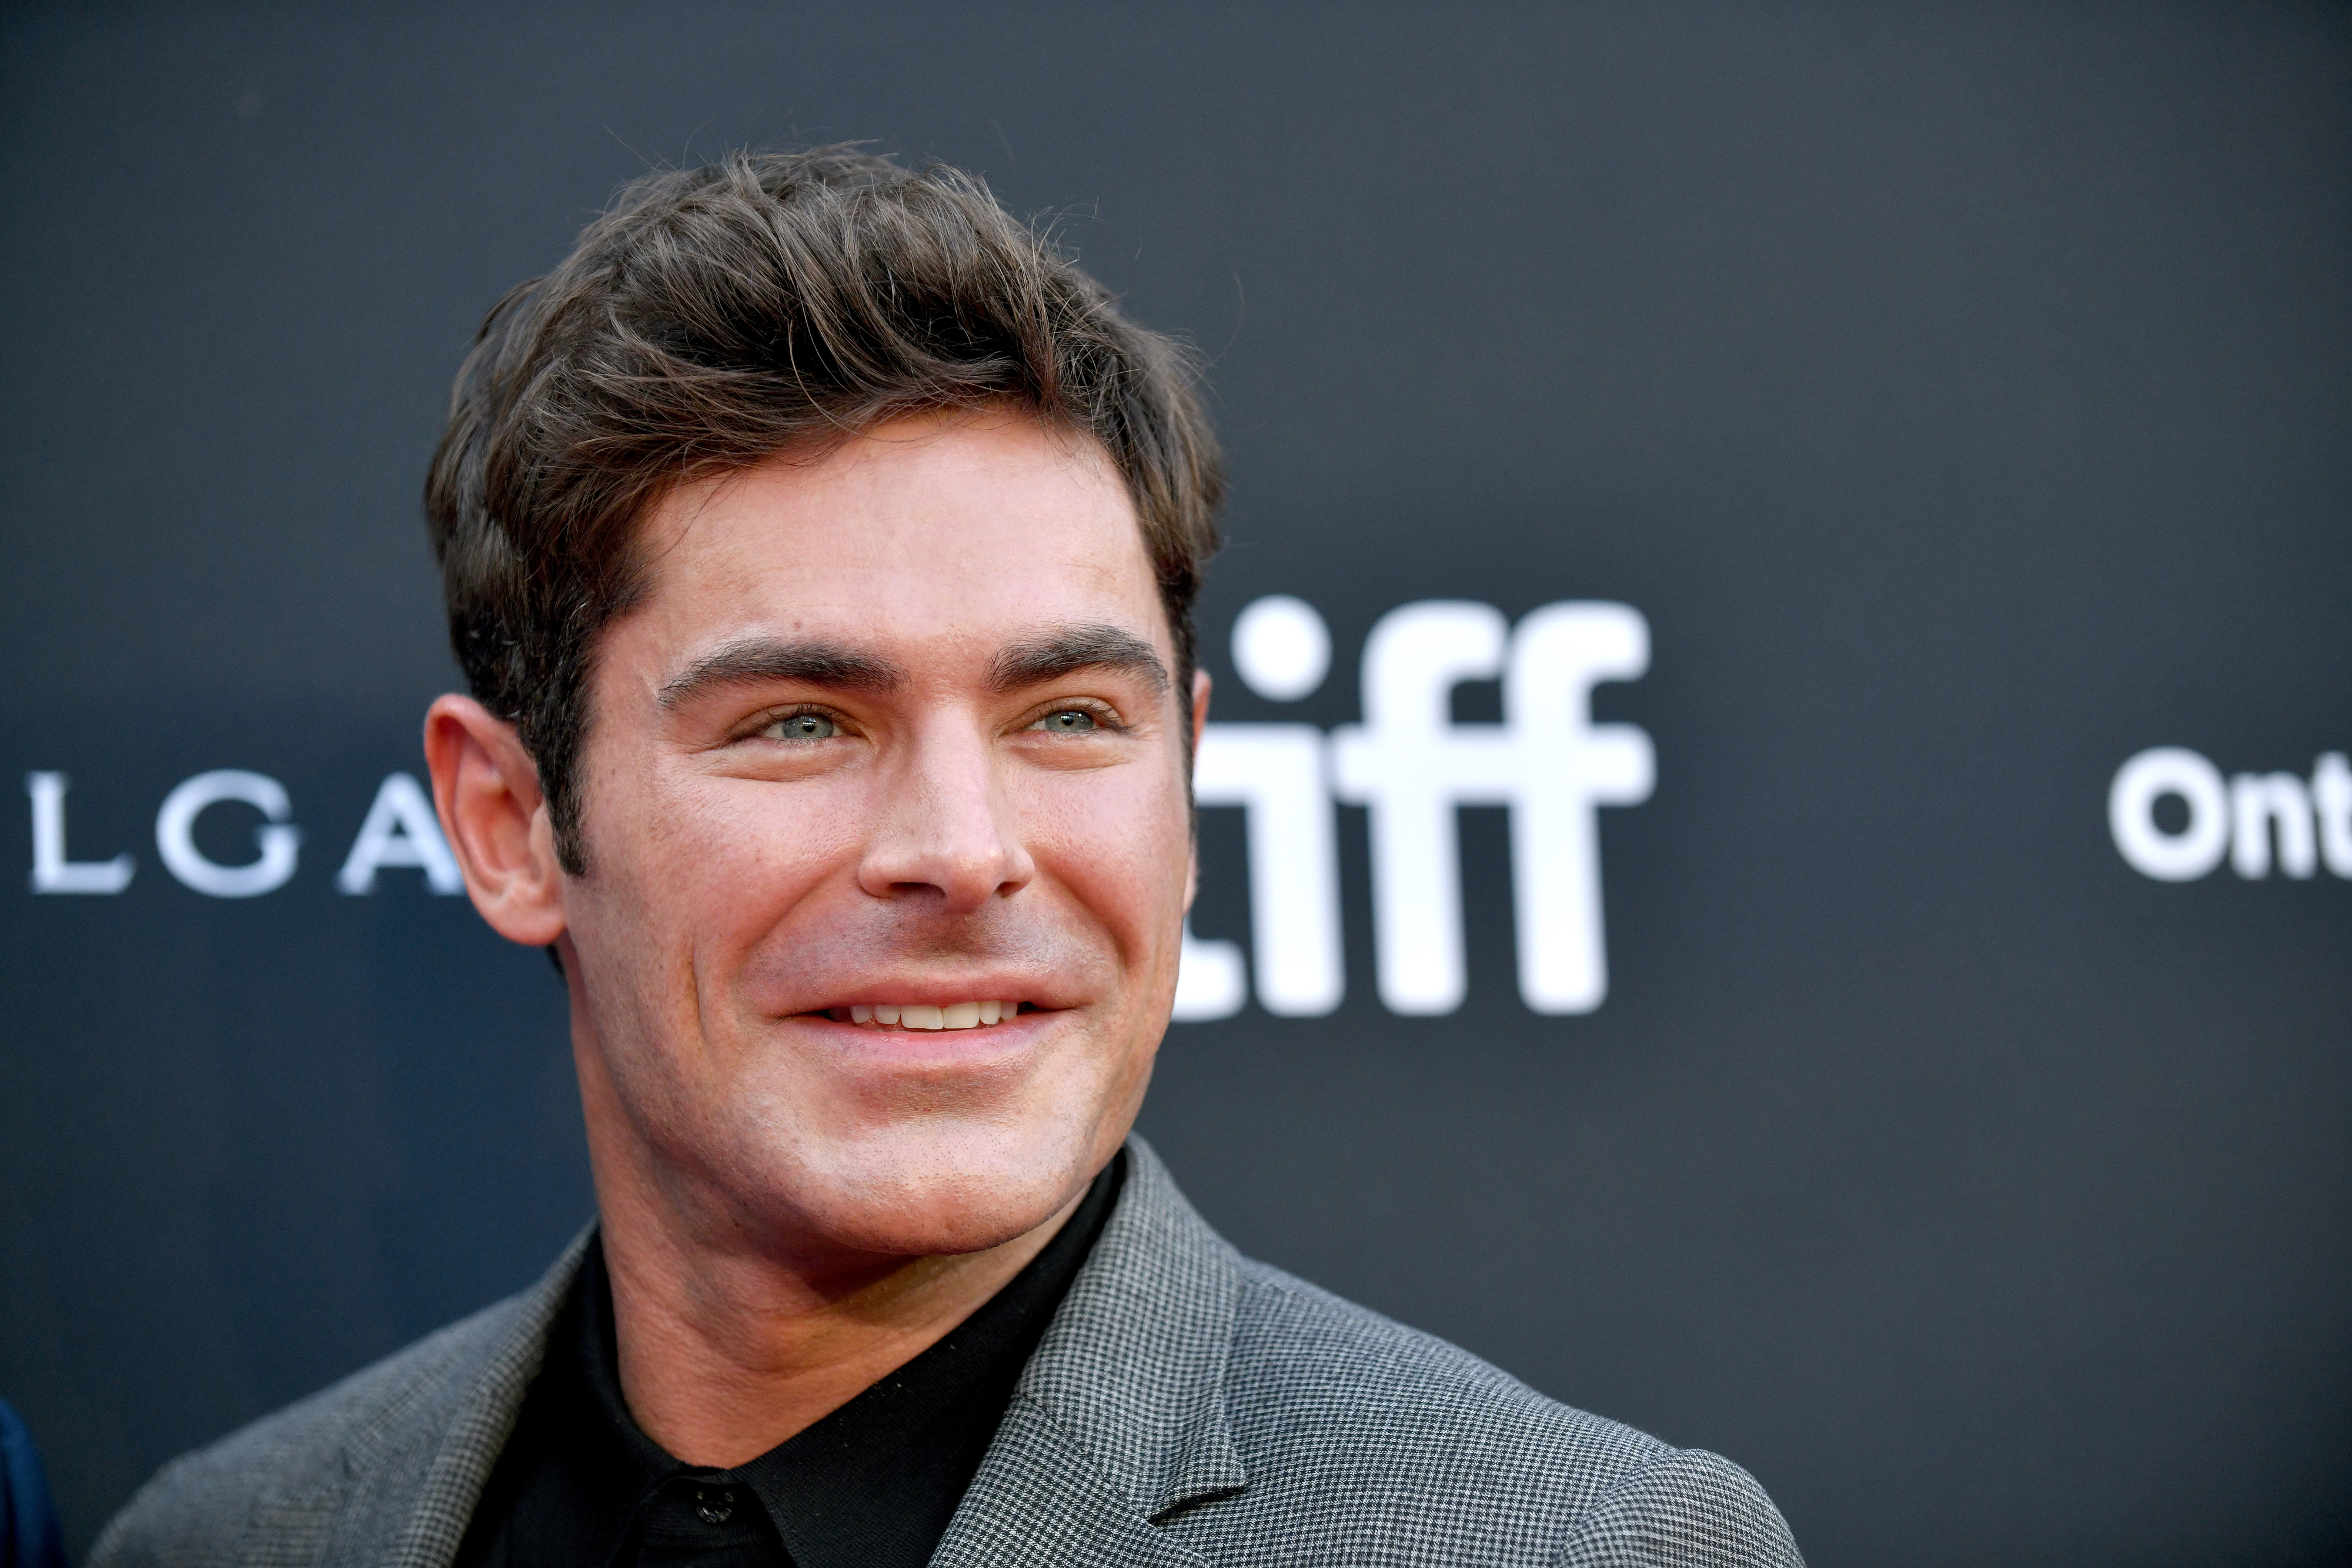 Close-up of Zac smiling at a media event